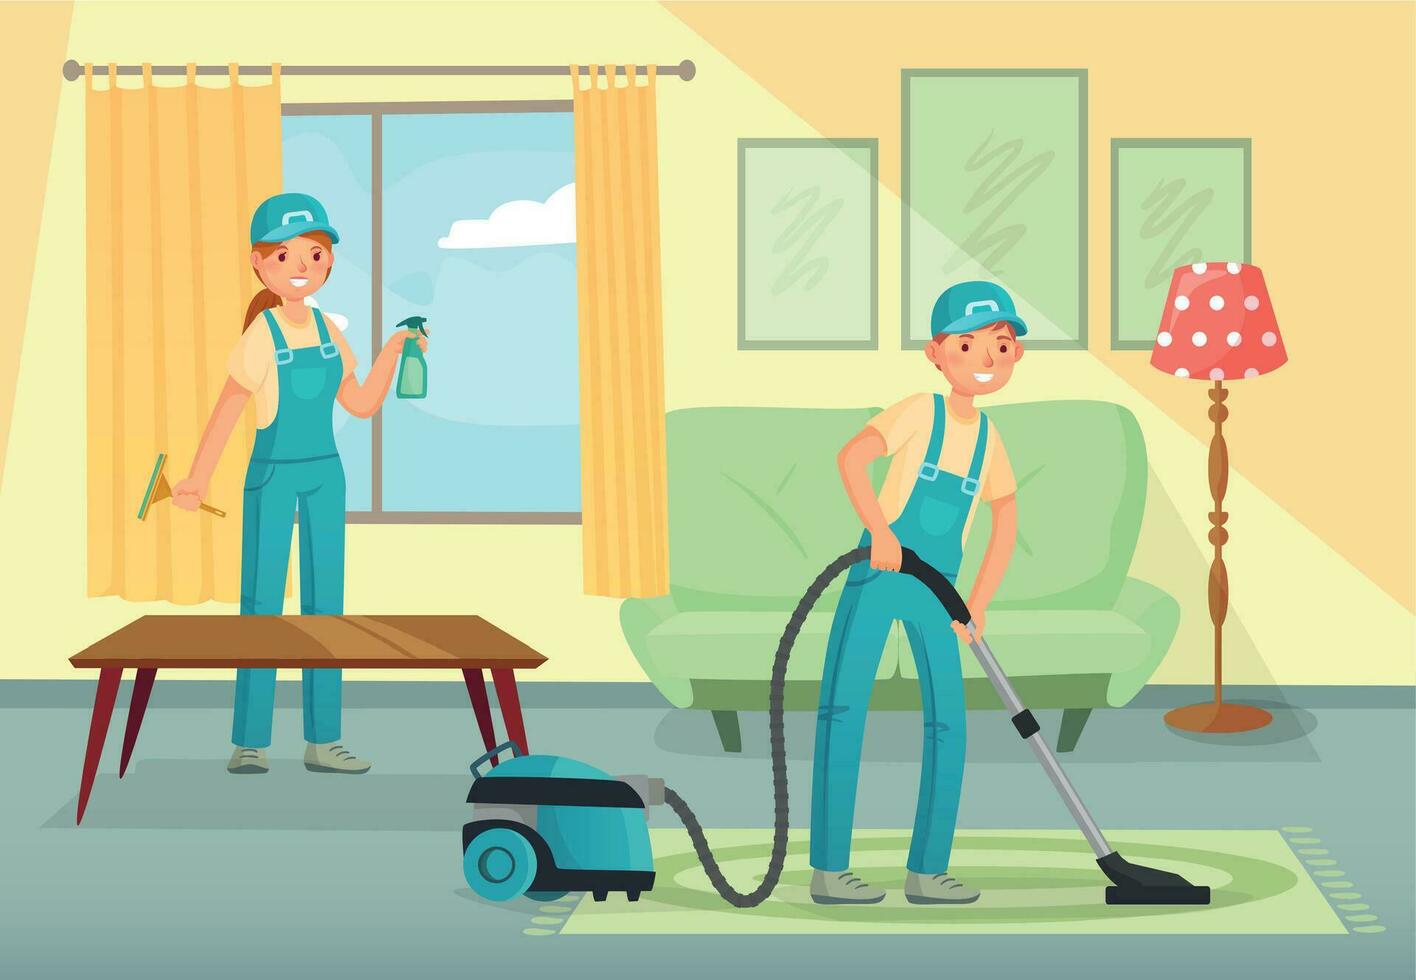 Professional cleaning workers cleaning living room. Man and woman characters, cleaning company staff vector